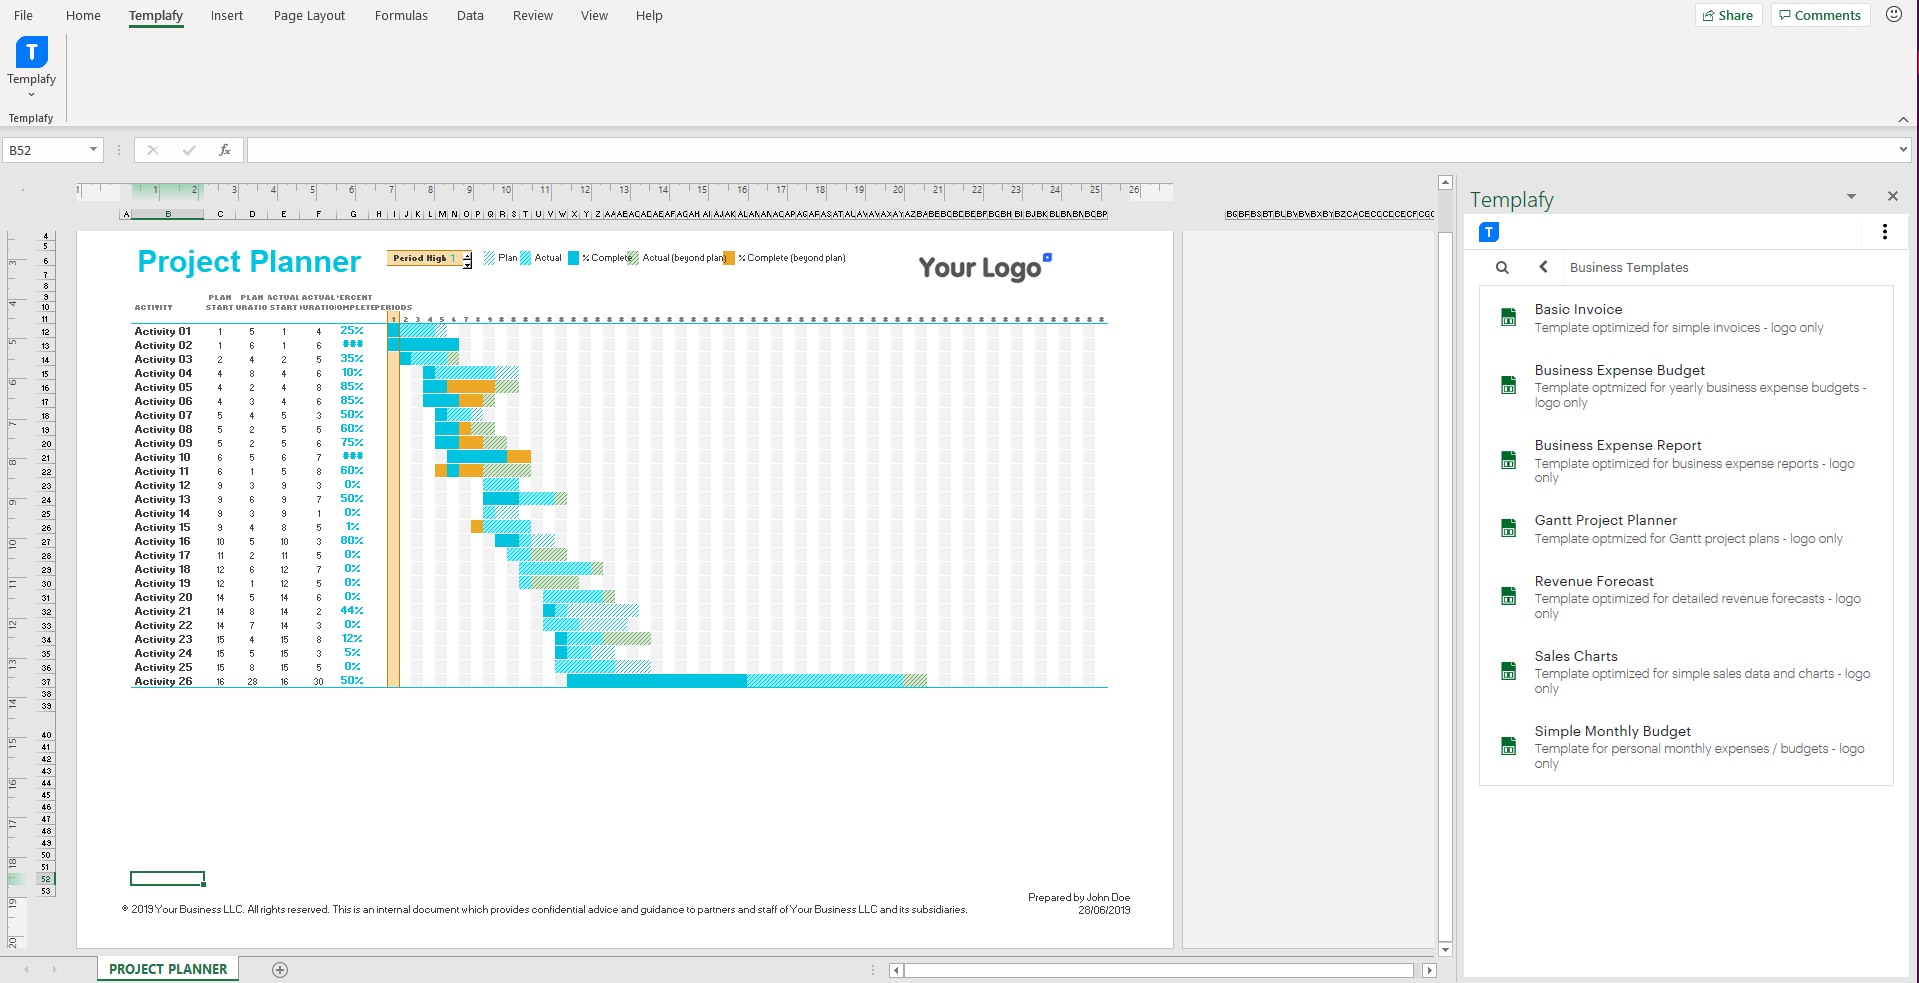 Screenshot of Templafy Dynamics in Excel 